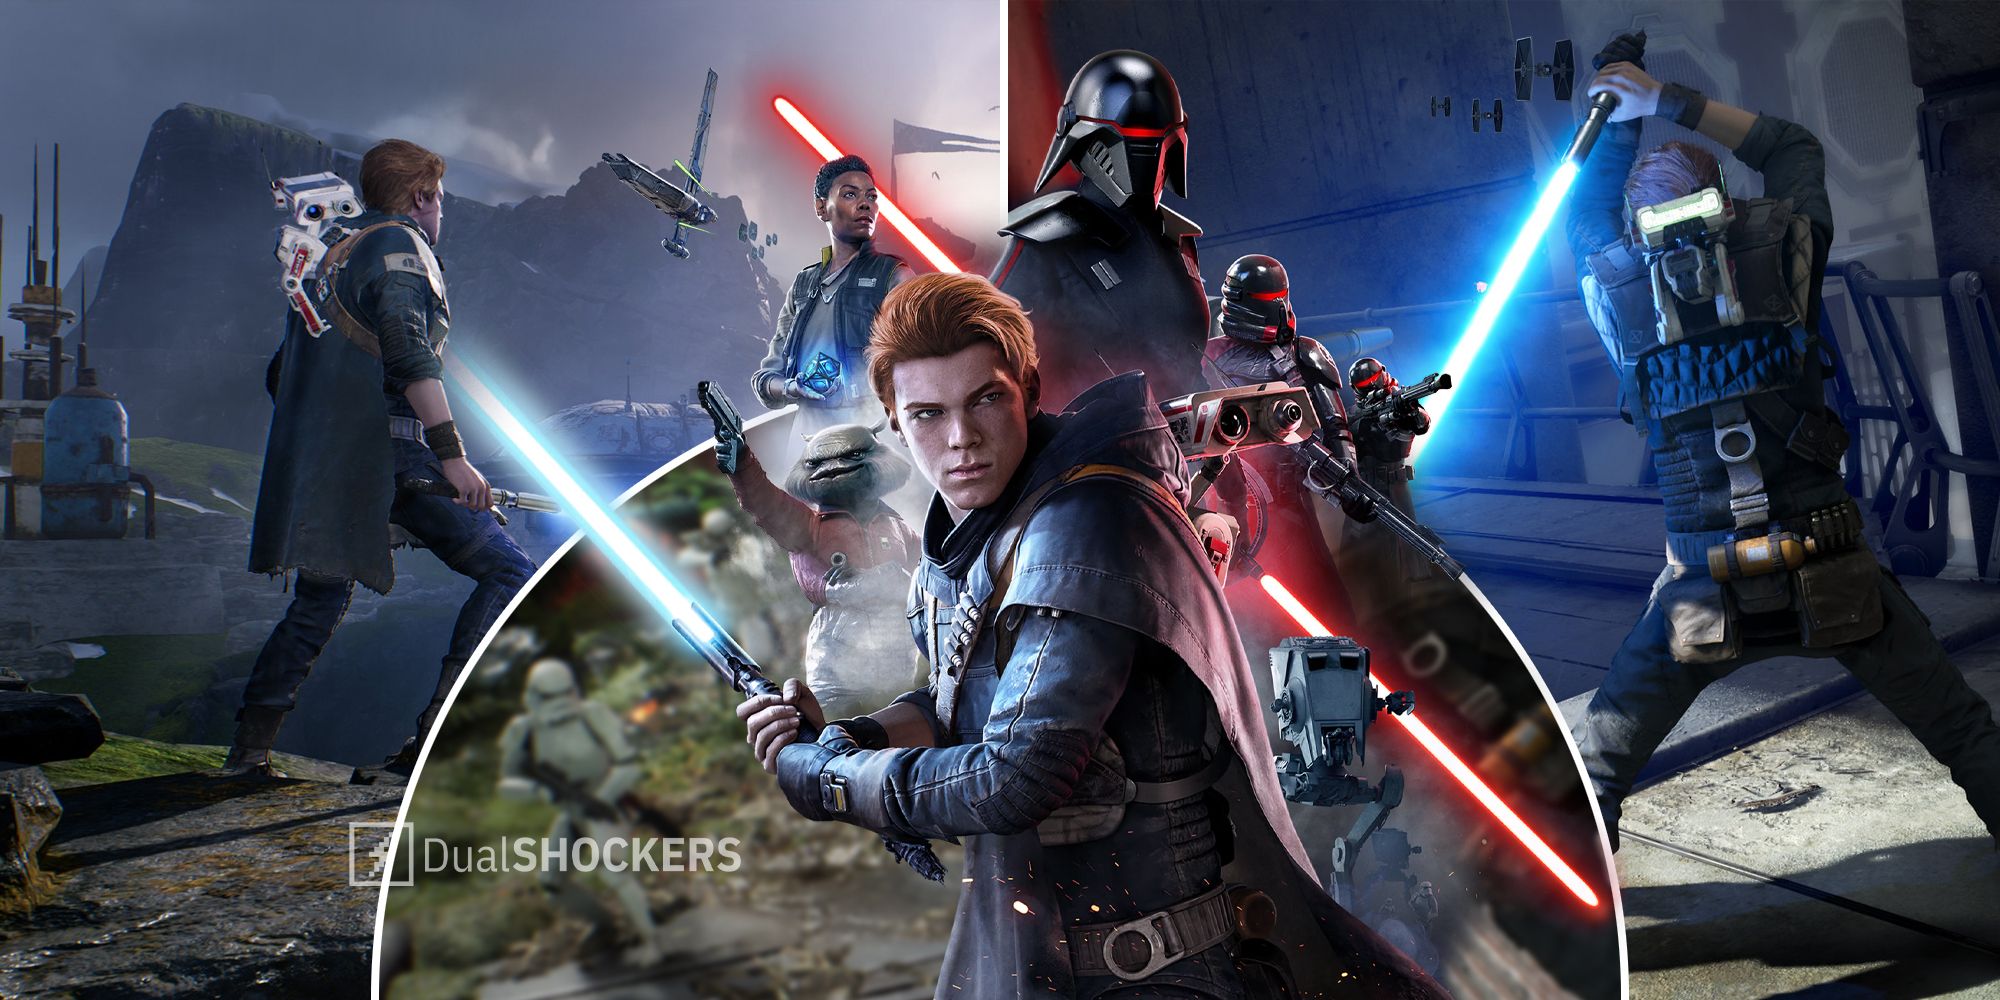 Star Wars Jedi: Fallen Order Cal Kestis and characters in gameplay